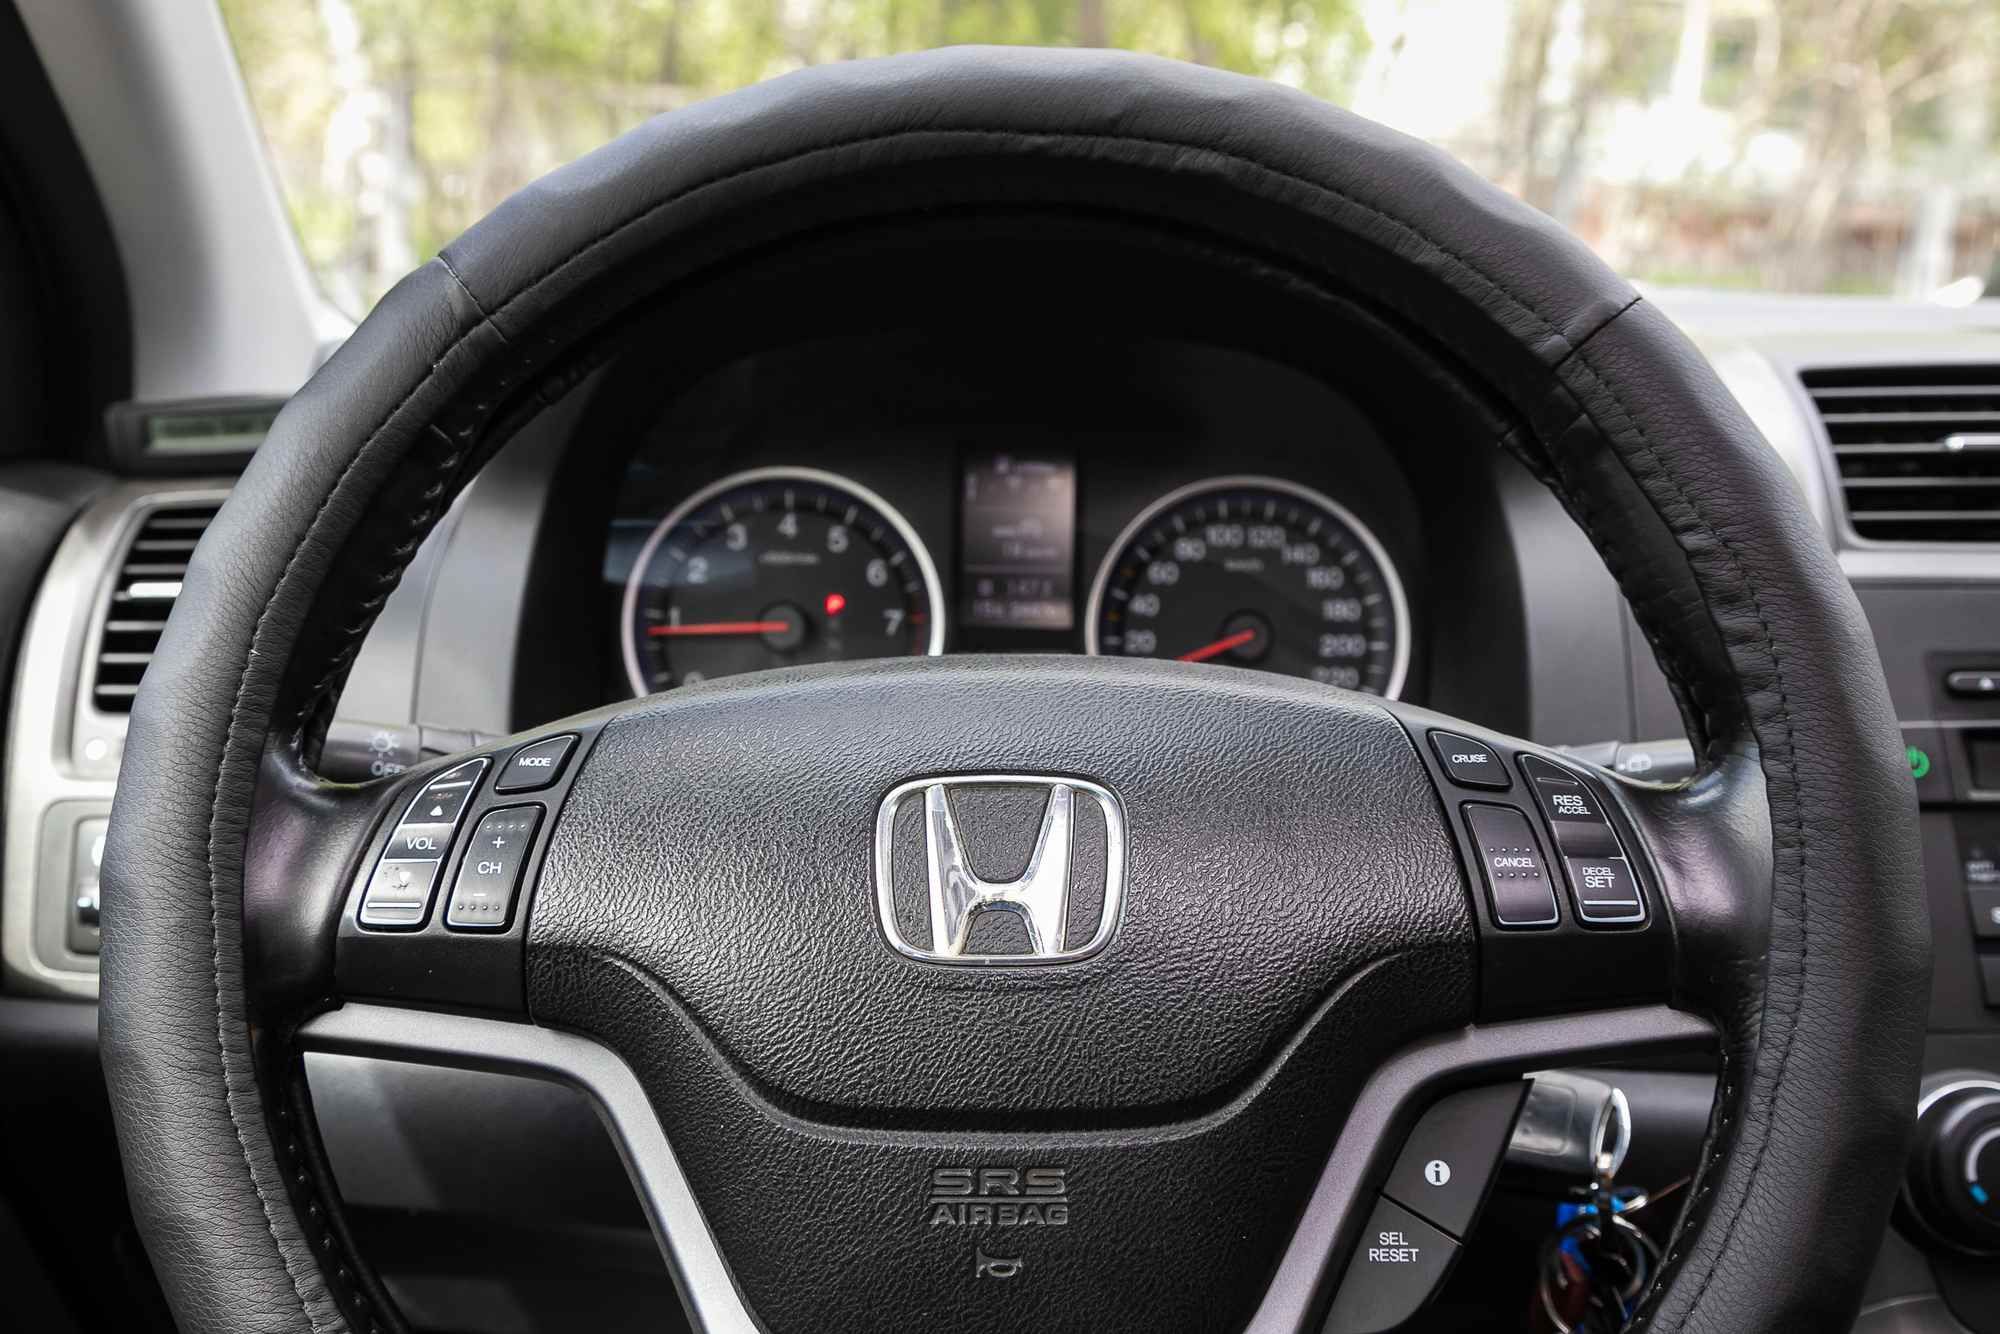 Honda owners are claiming their cars won't heat up.